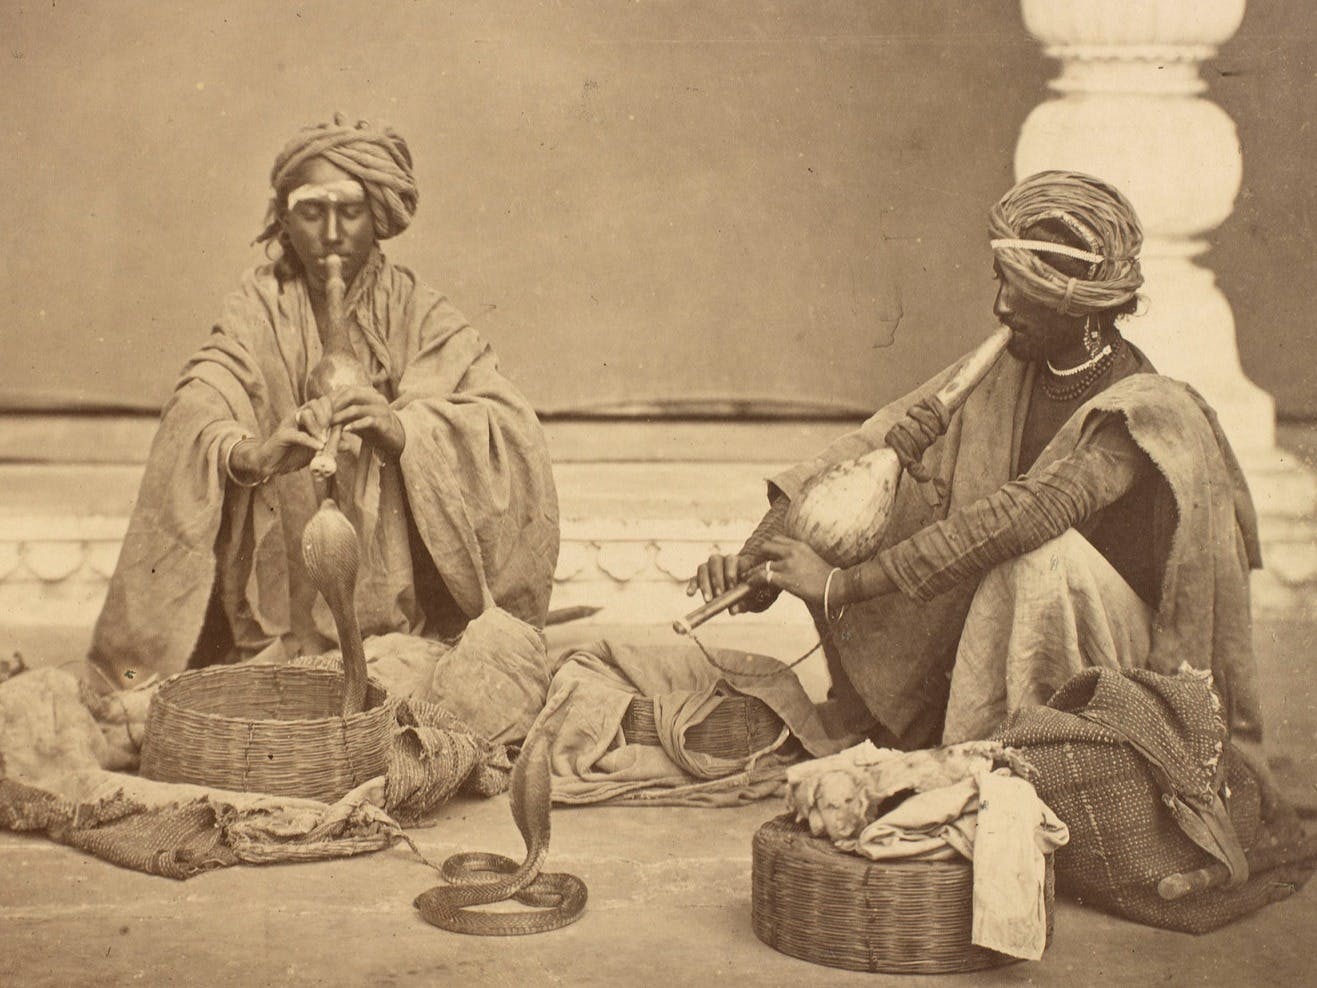 "Snake Charmers: Prince of Wales Tour of India" 1875-6 (Royal UK Collection)